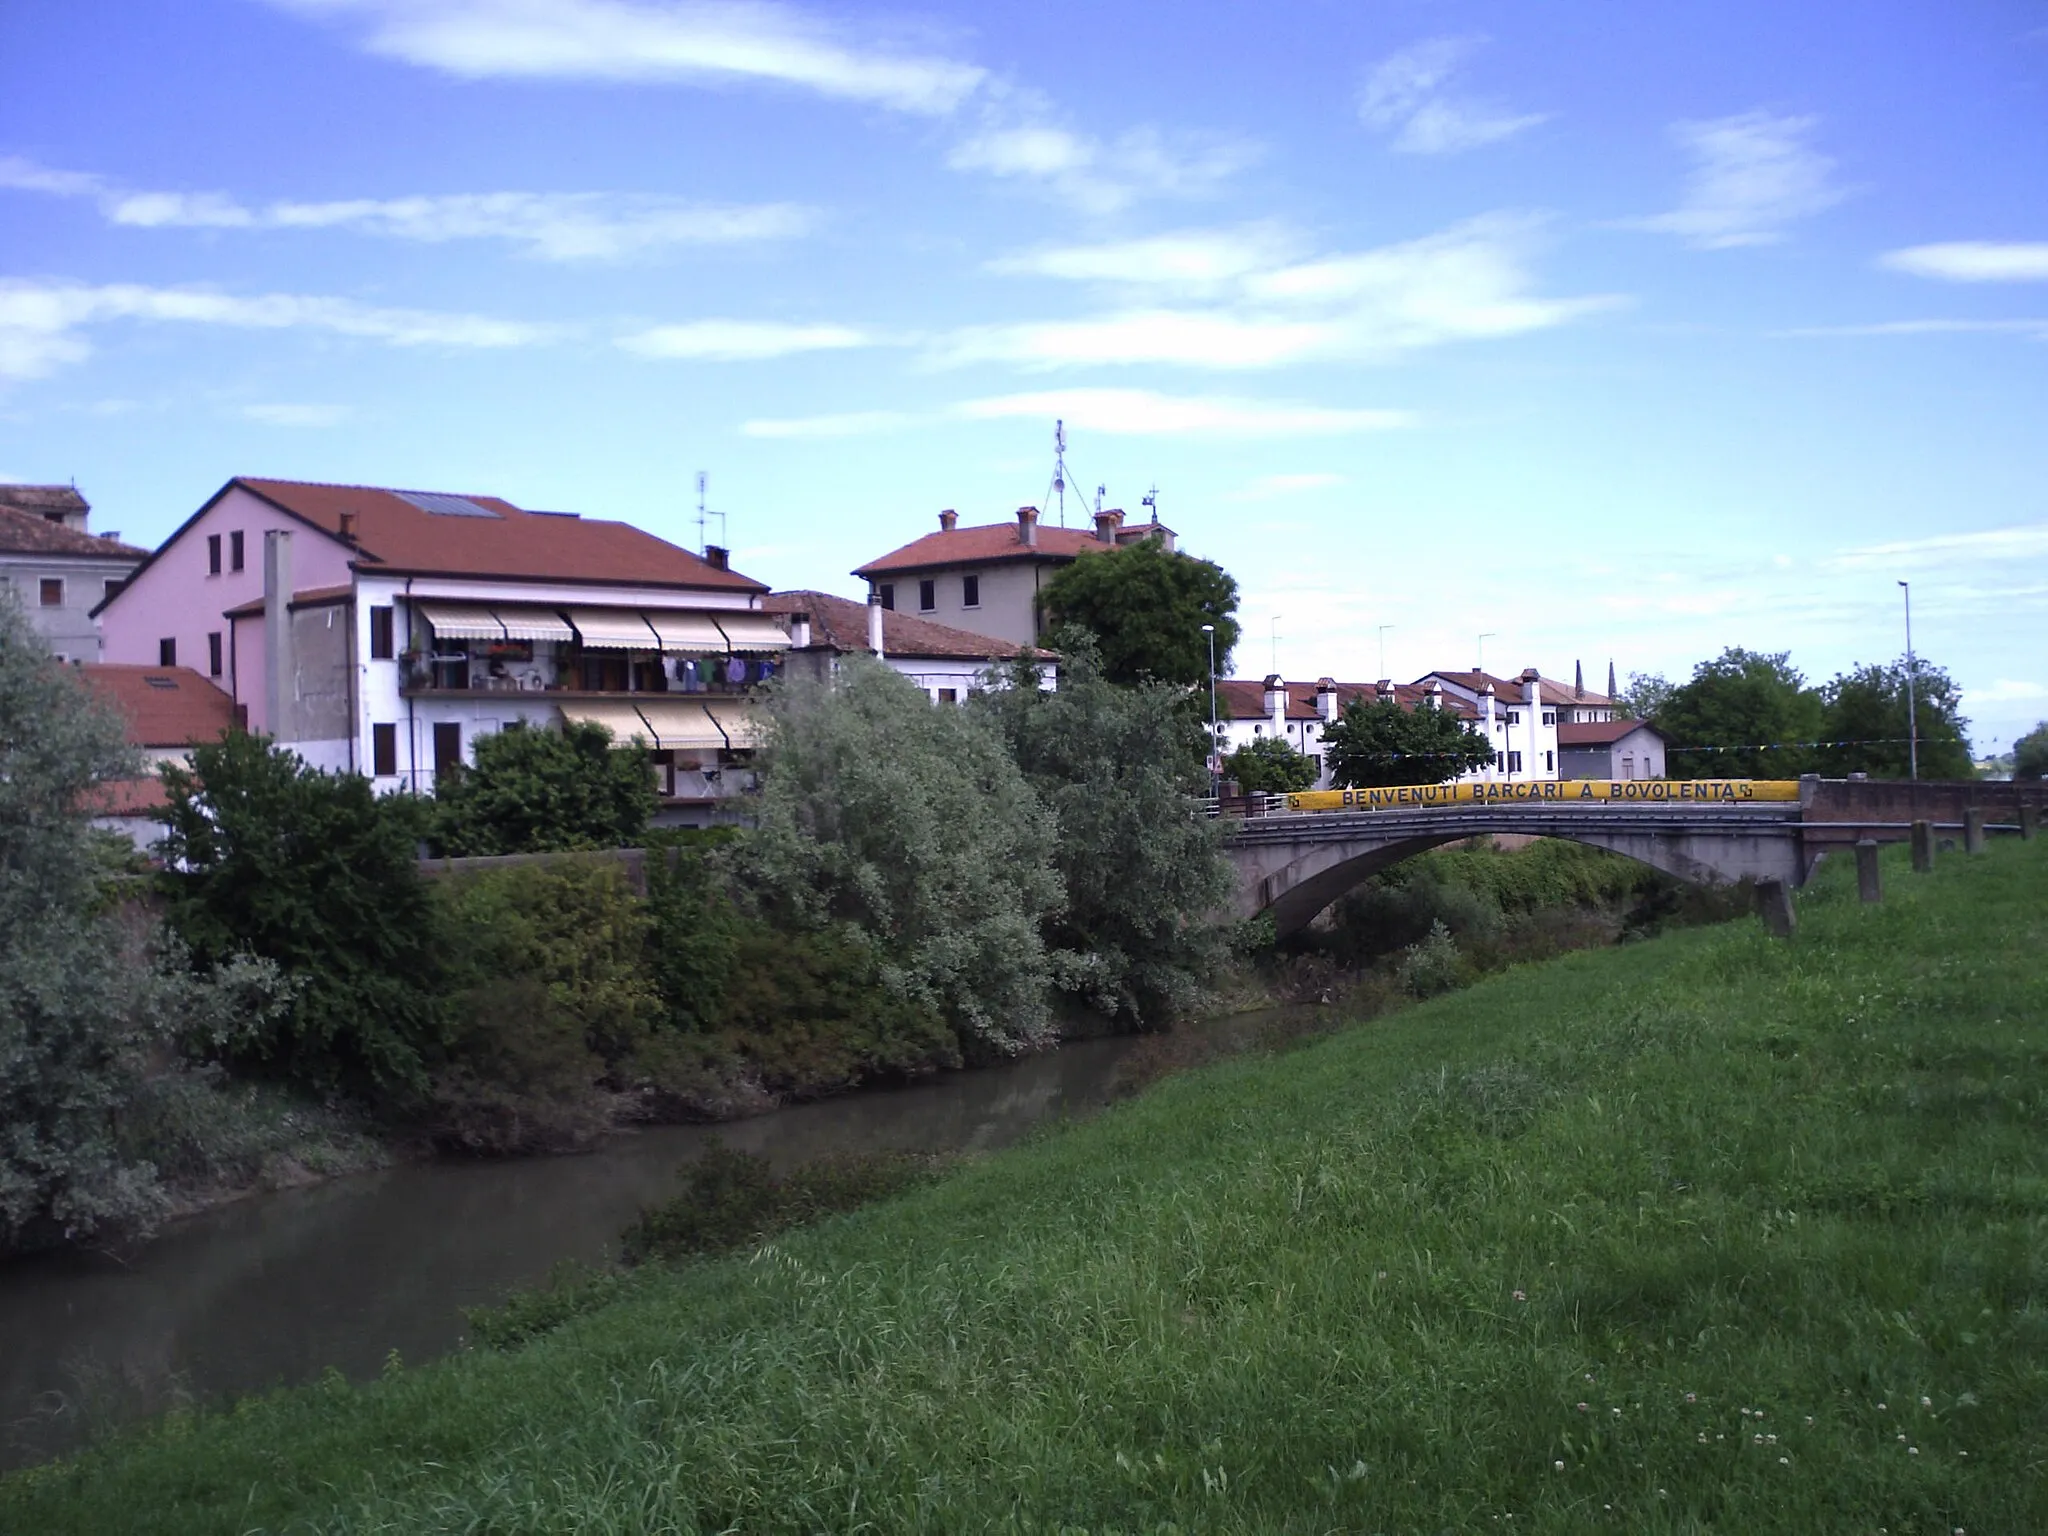 Photo showing: View of Bovolenta, Italy